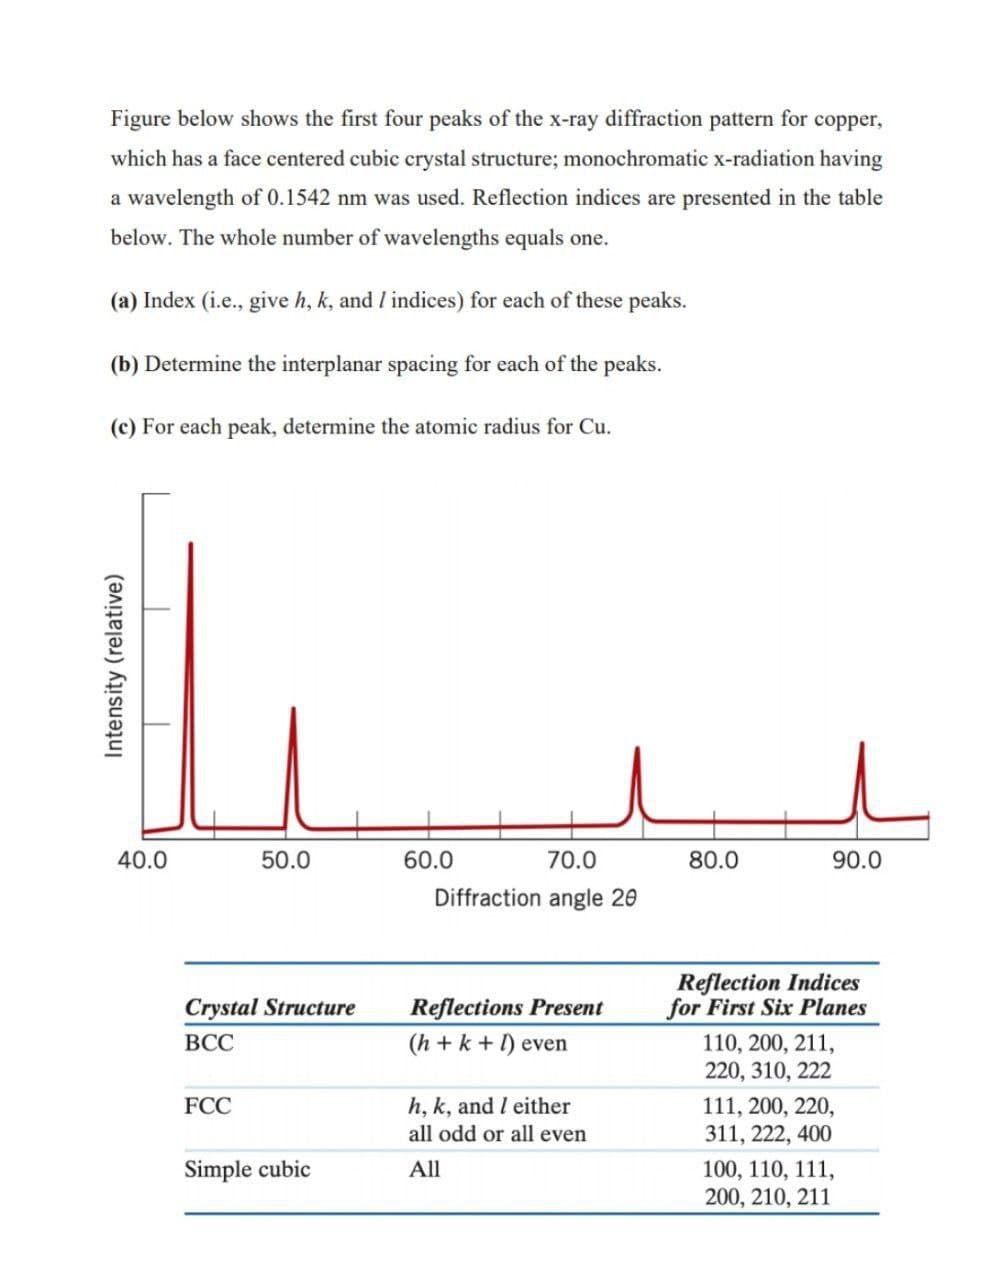 Figure below shows the first four peaks of the x-ray diffraction pattern for copper,
which has a face centered cubic crystal structure; monochromatic x-radiation having
a wavelength of 0.1542 nm was used. Reflection indices are presented in the table
below. The whole number of wavelengths equals one.
(a) Index (i.e., give h, k, and I indices) for each of these peaks.
(b) Determine the interplanar spacing for each of the peaks.
(c) For each peak, determine the atomic radius for Cu.
40.0
50.0
60.0
70.0
80.0
90.0
Diffraction angle 20
Reflection Indices
for First Six Planes
Reflections Present
(h + k + ) even
Crystal Structure
110, 200, 211,
220, 310, 222
ВСС
h, k, and I either
all odd or all even
111, 200, 220,
311, 222, 400
FCC
100, 110, 111,
200, 210, 211
Simple cubic
All
Intensity (relative)
